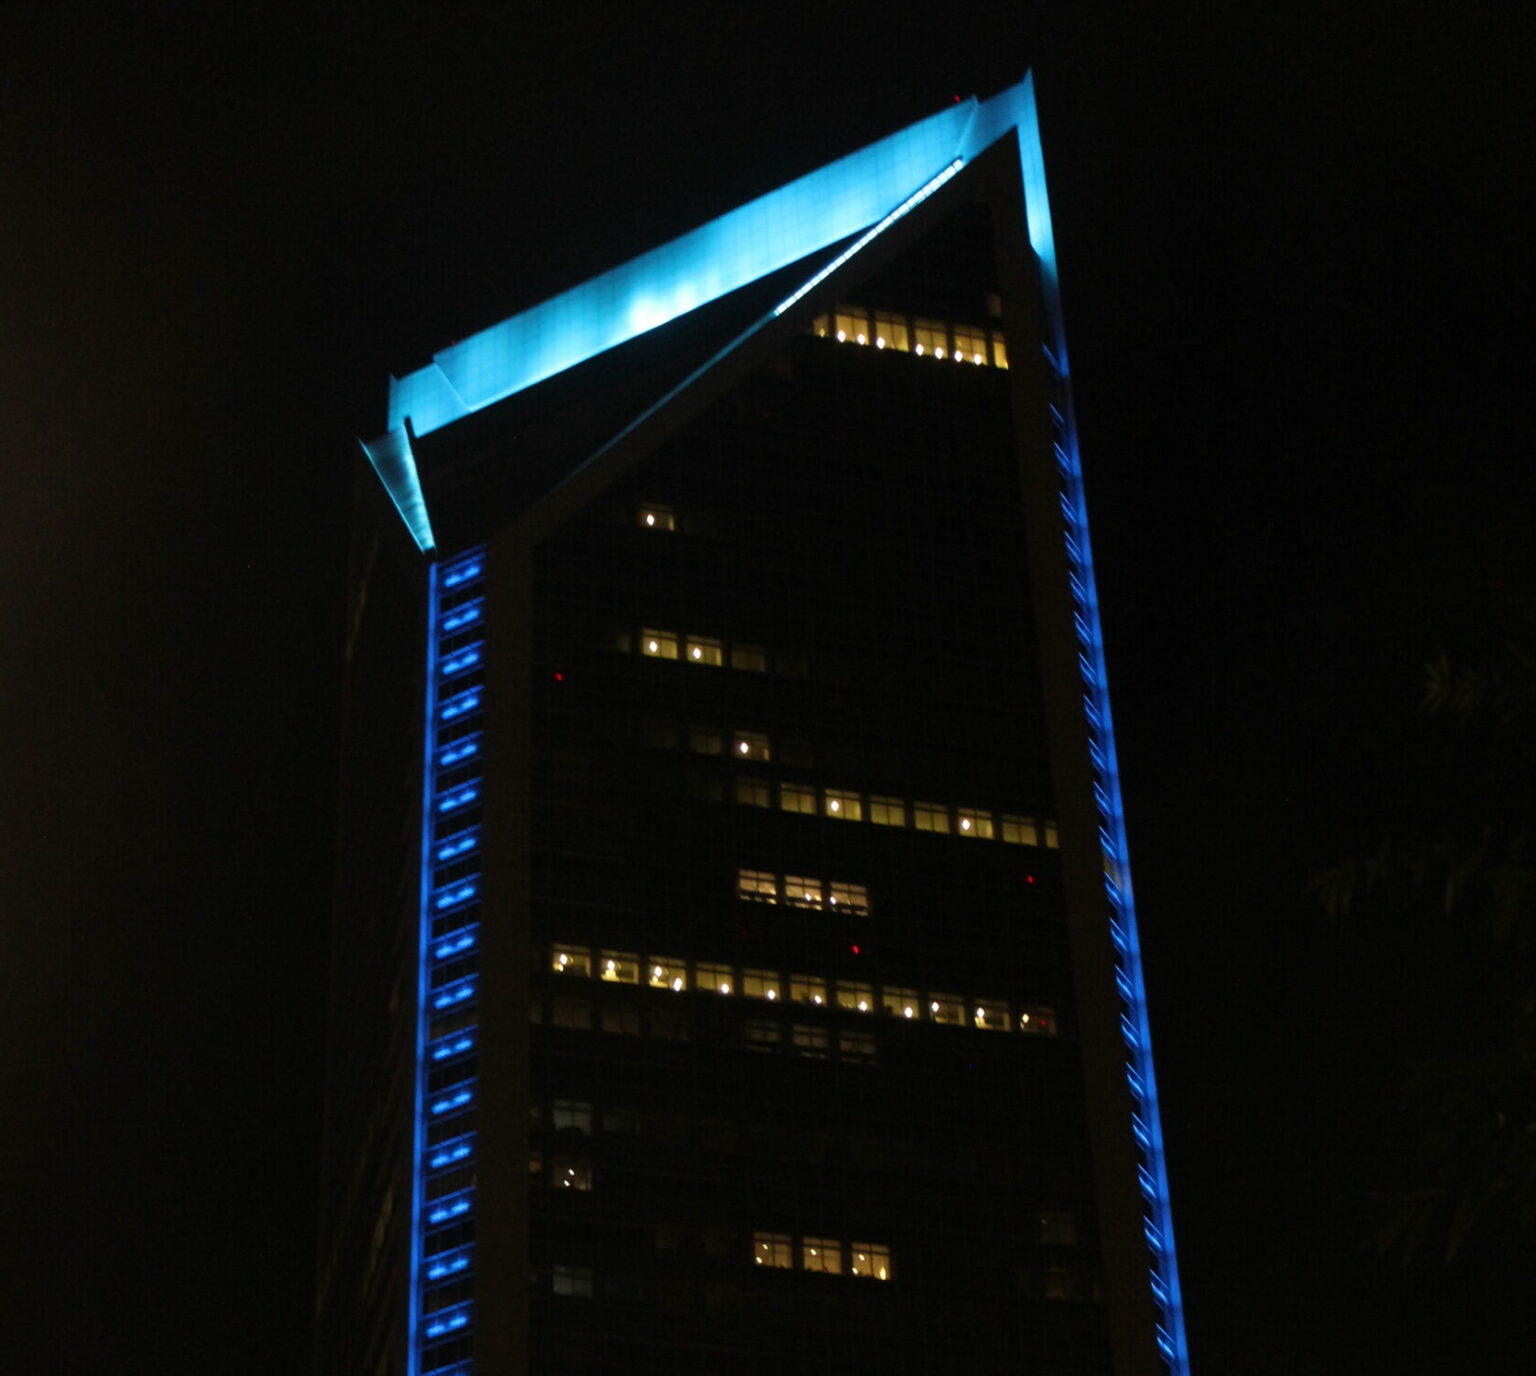 550 S Tryon lit in honor of K Sailer